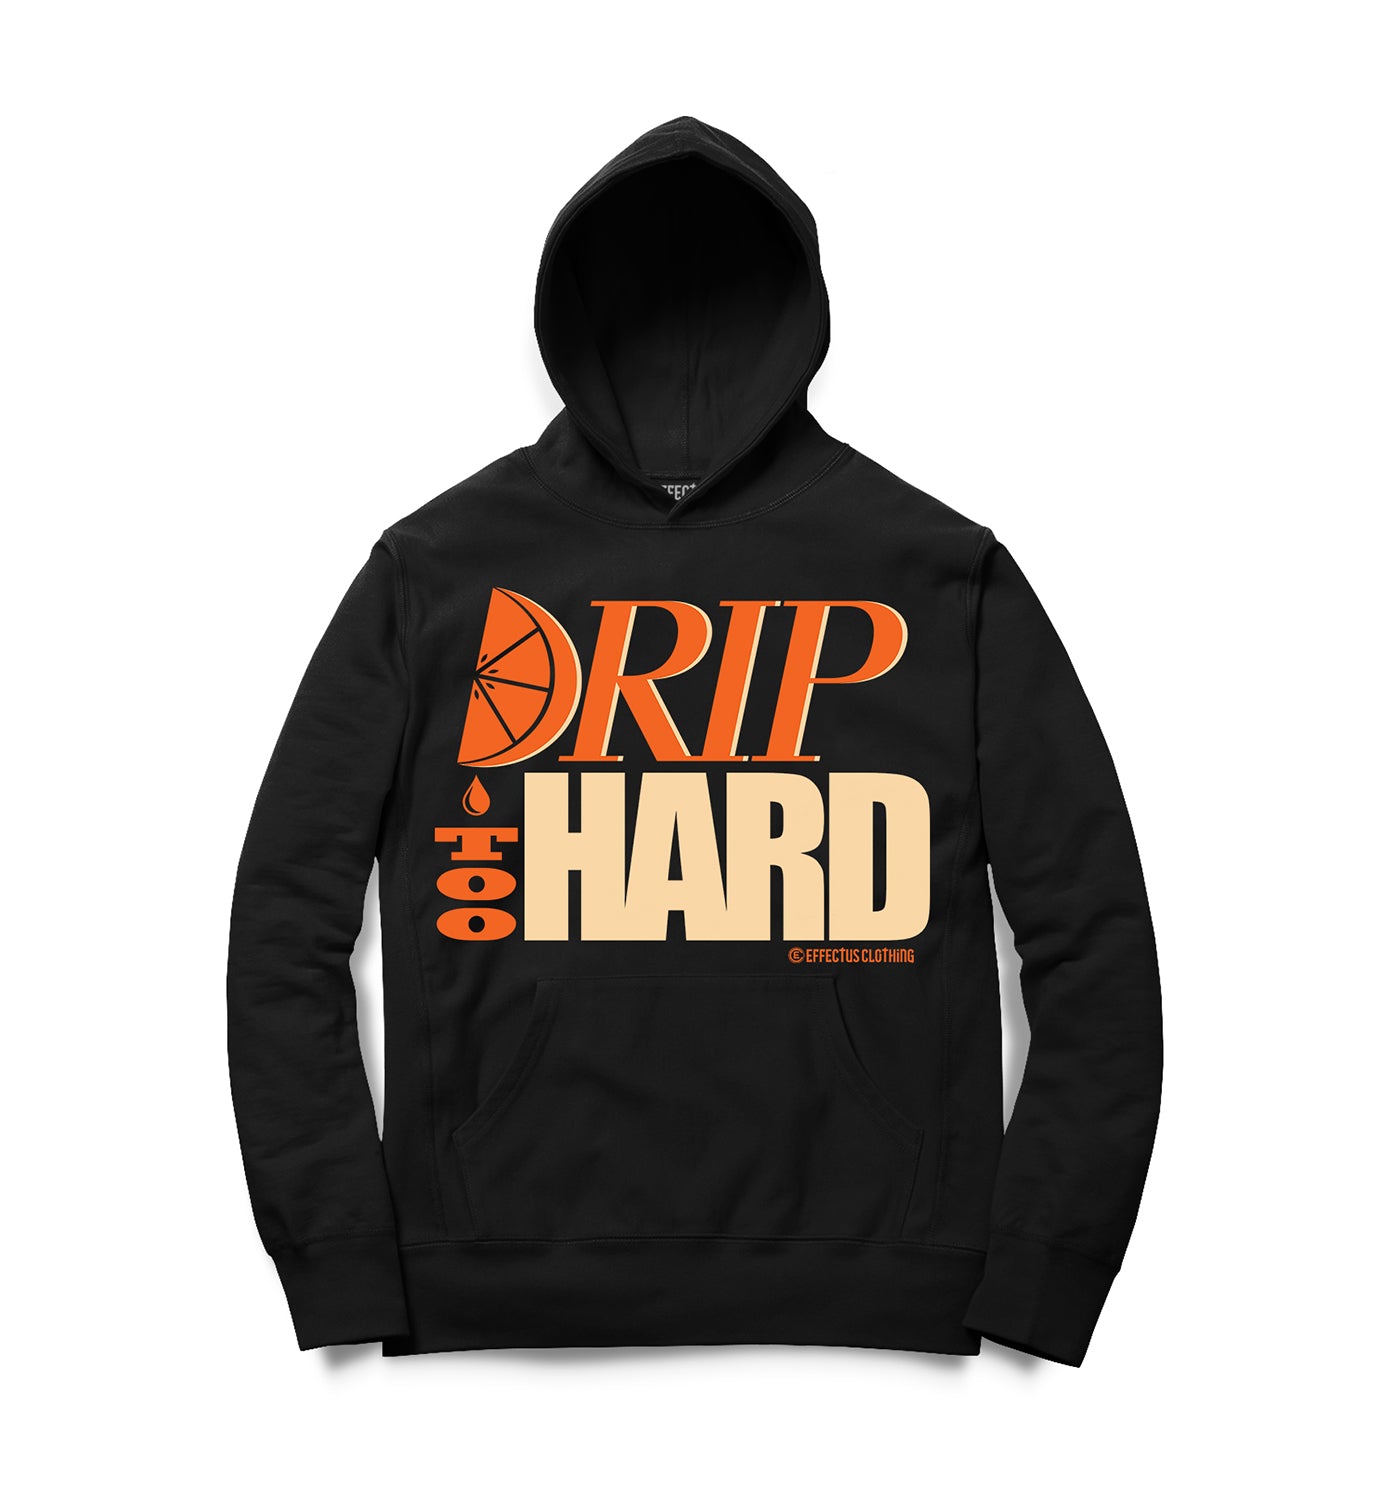 Drip too hard Hoodies to match with Jordan 1 Shattered Backboards